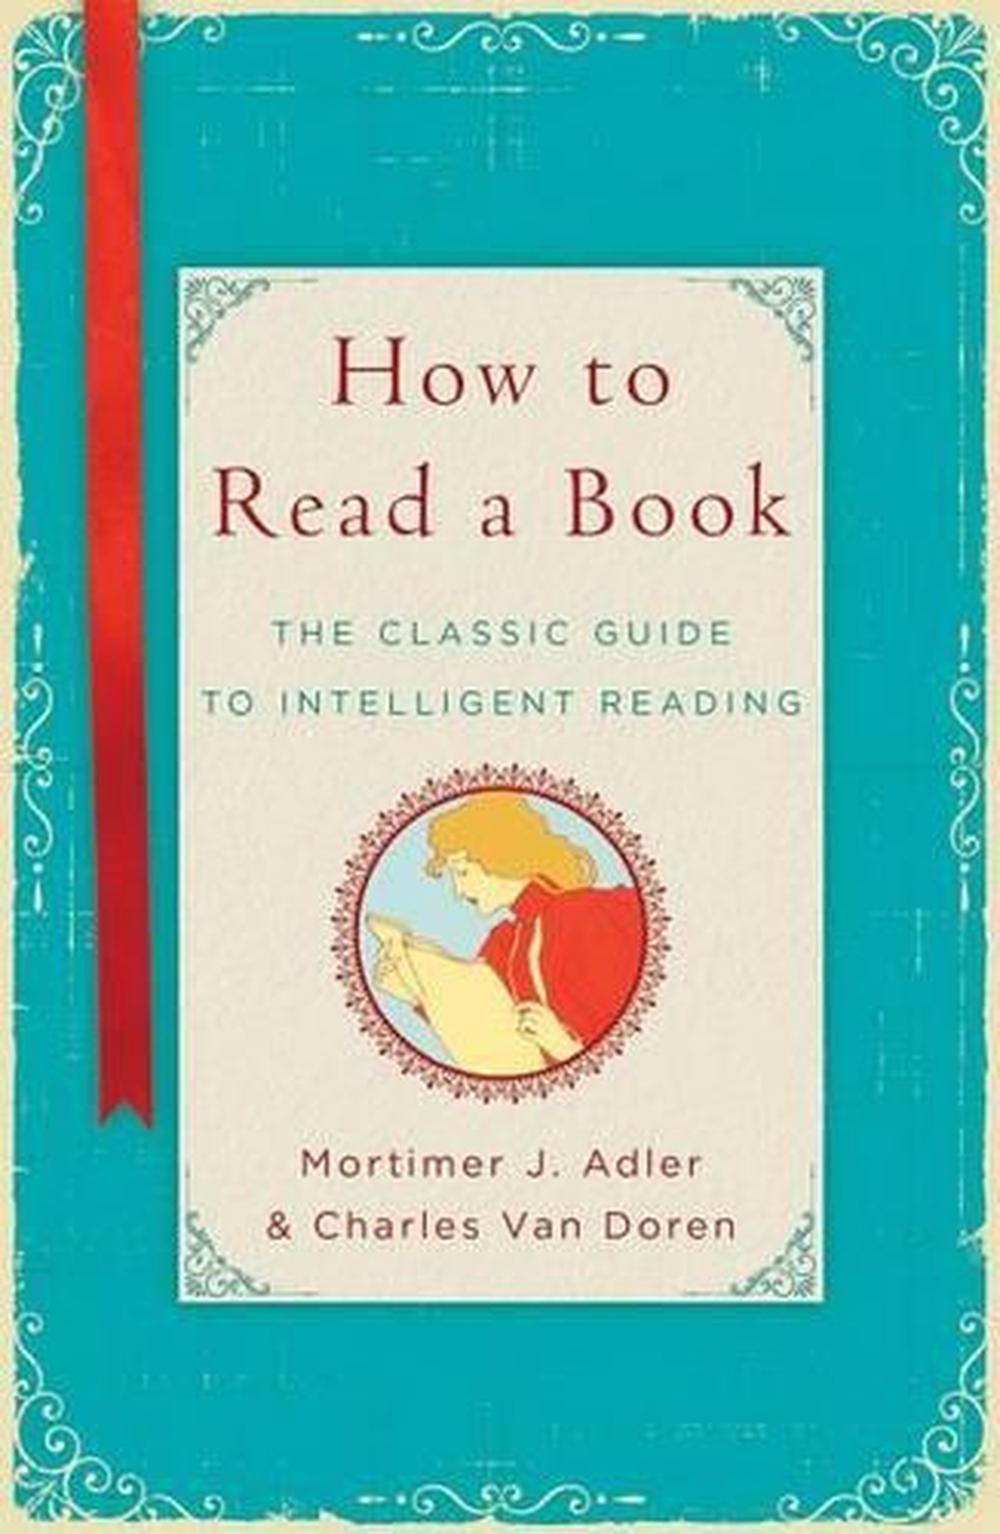 how to read a book book by mortimer j adler